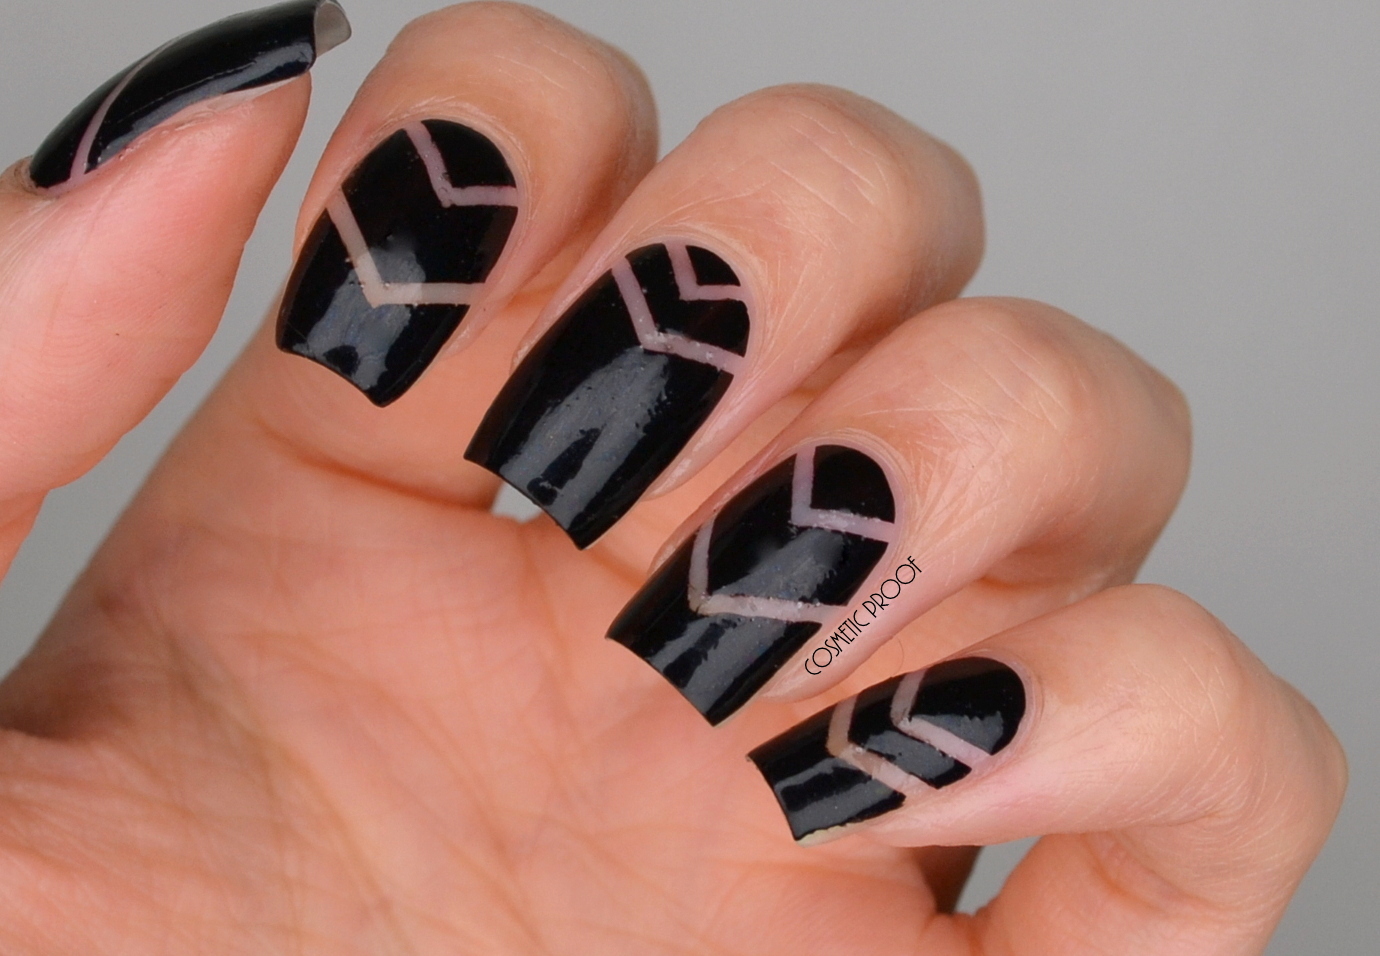 6. Straight Lines Nail Art with Negative Space - wide 5